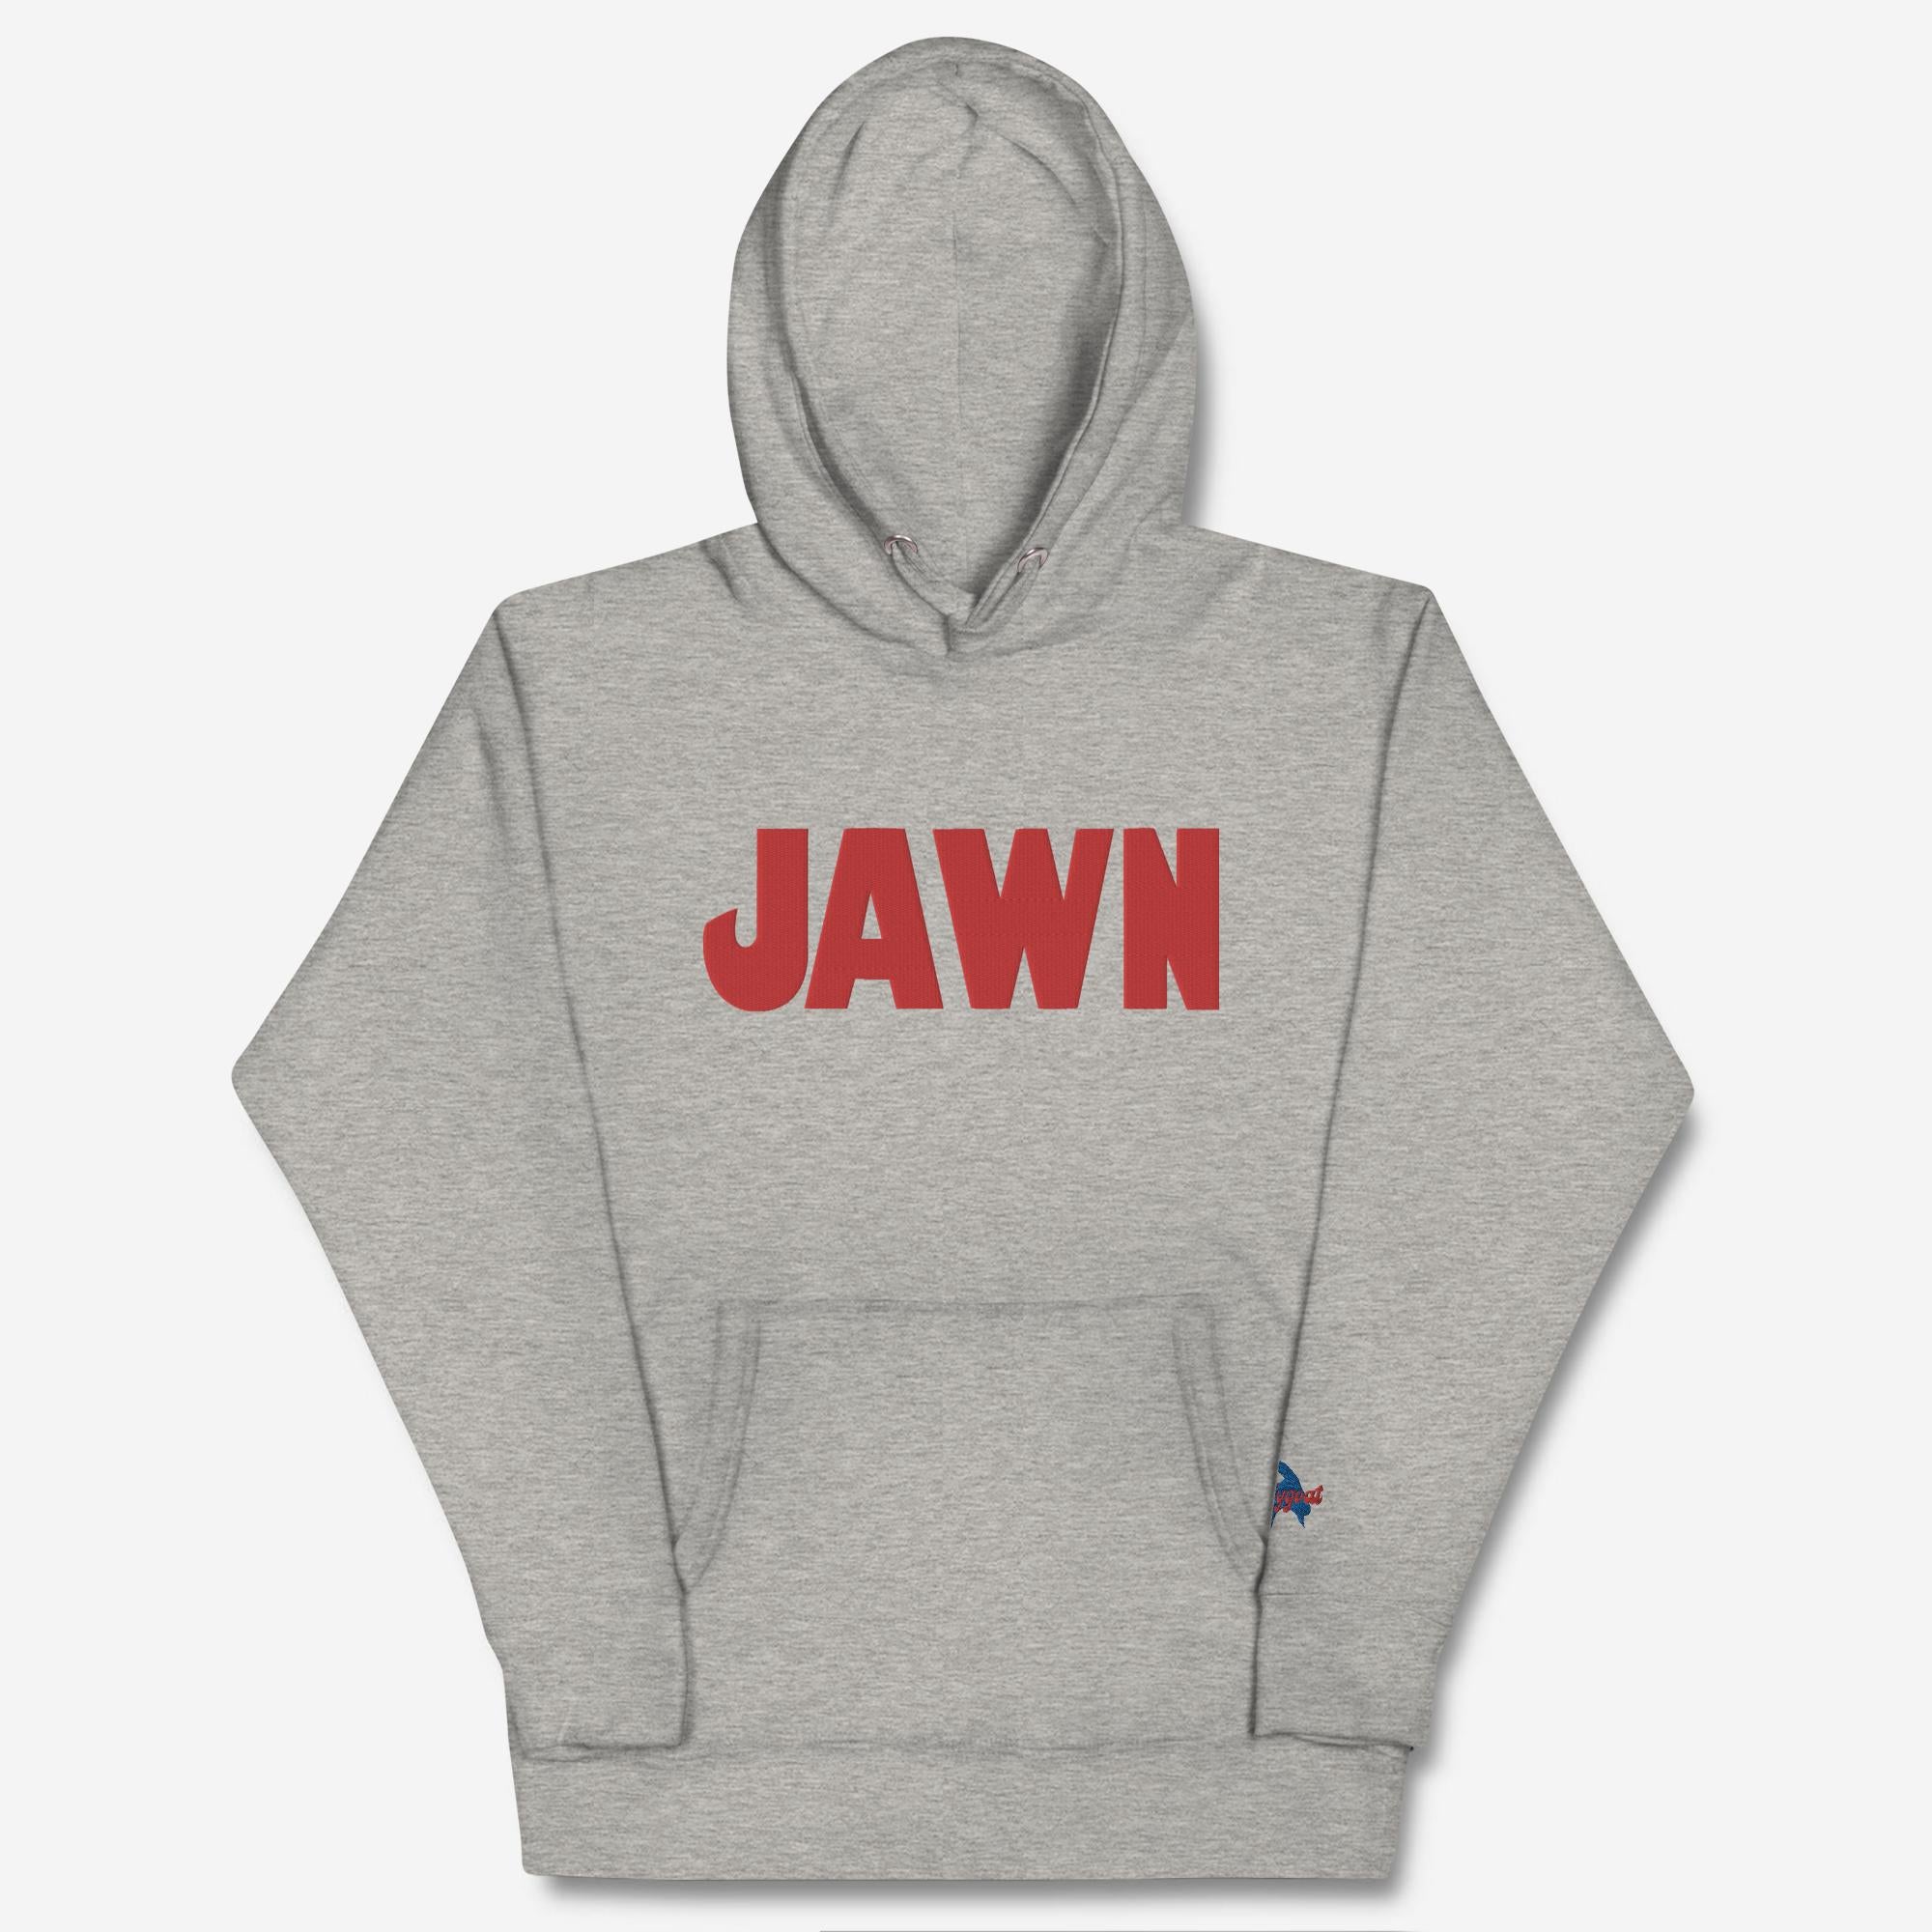 "Jaws Jawn" Embroidered Hoodie